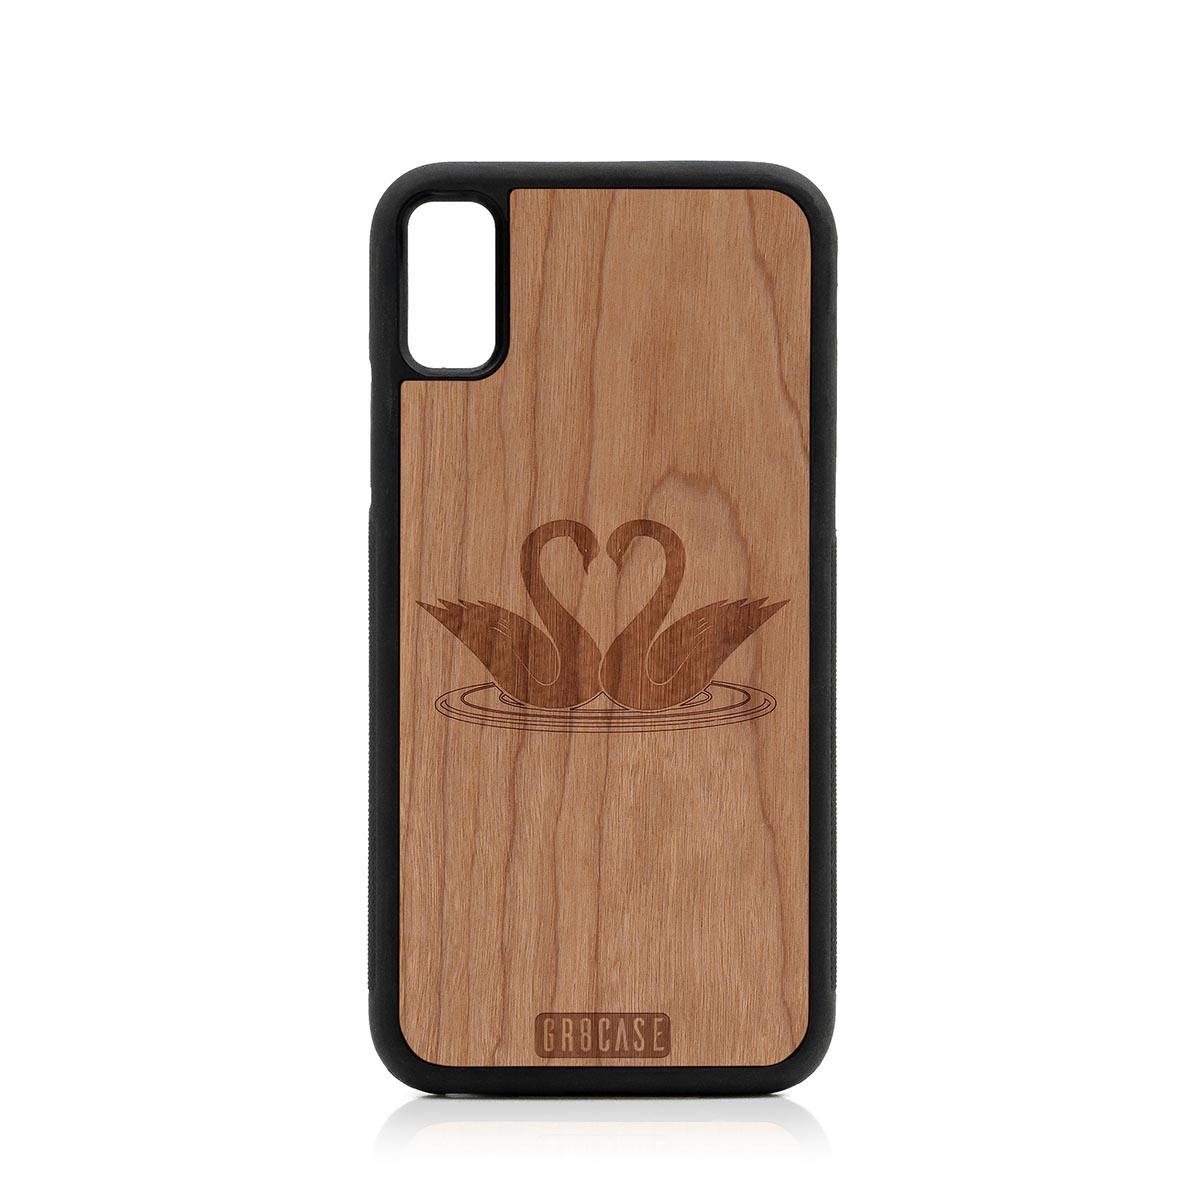 Swans Design Wood Case For iPhone XR